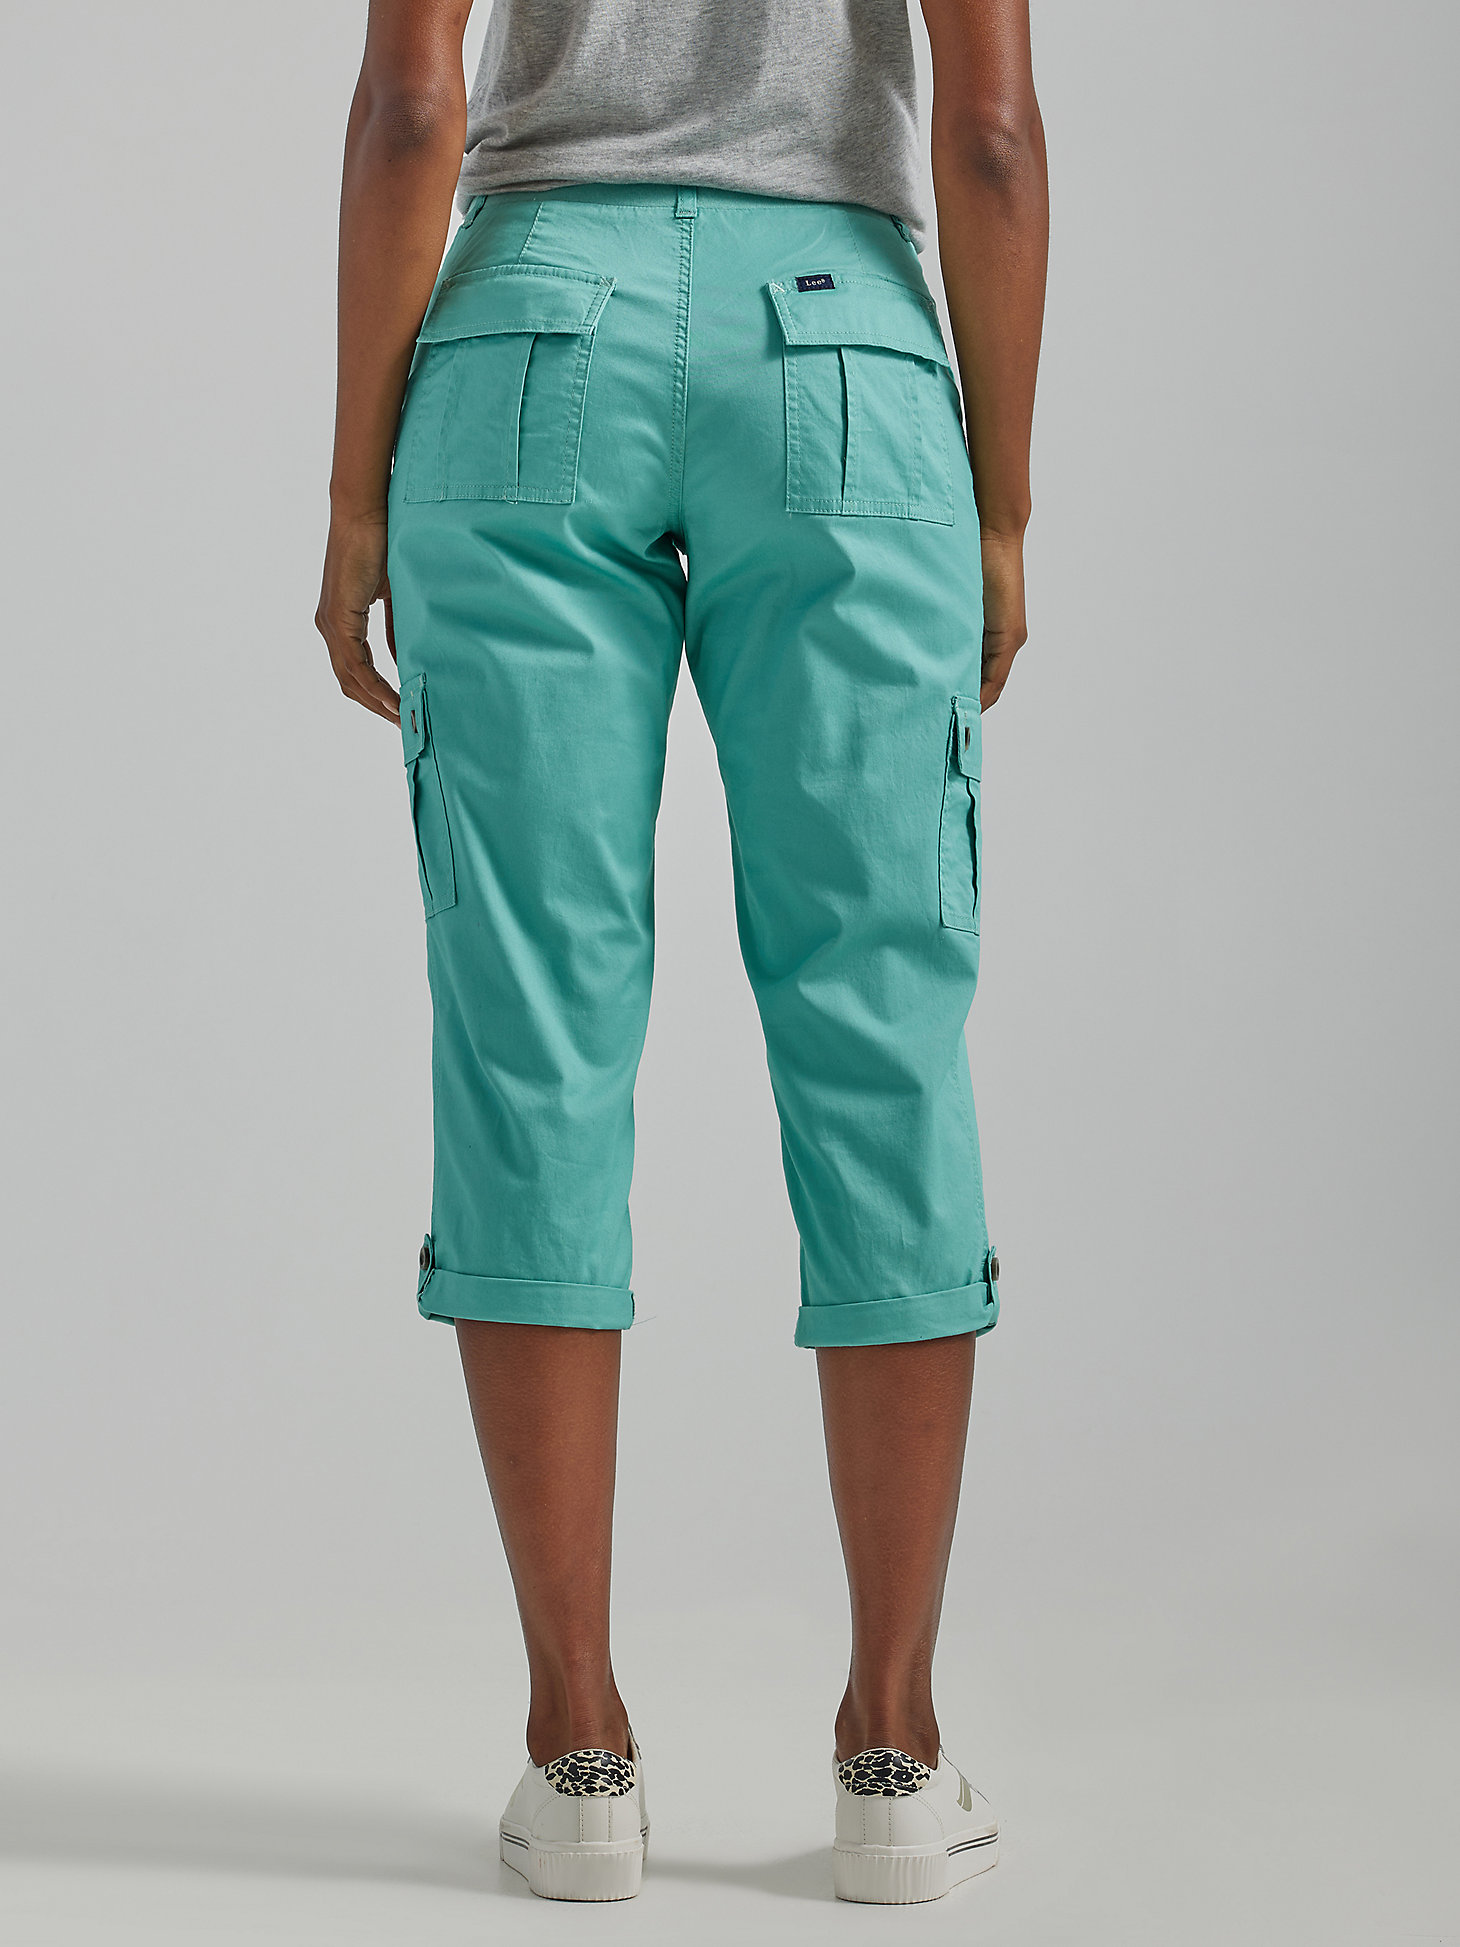 Women's Ultra Lux with Flex-To-Go Relaxed Cargo Capri (Petite) in Dusty Jade alternative view 1